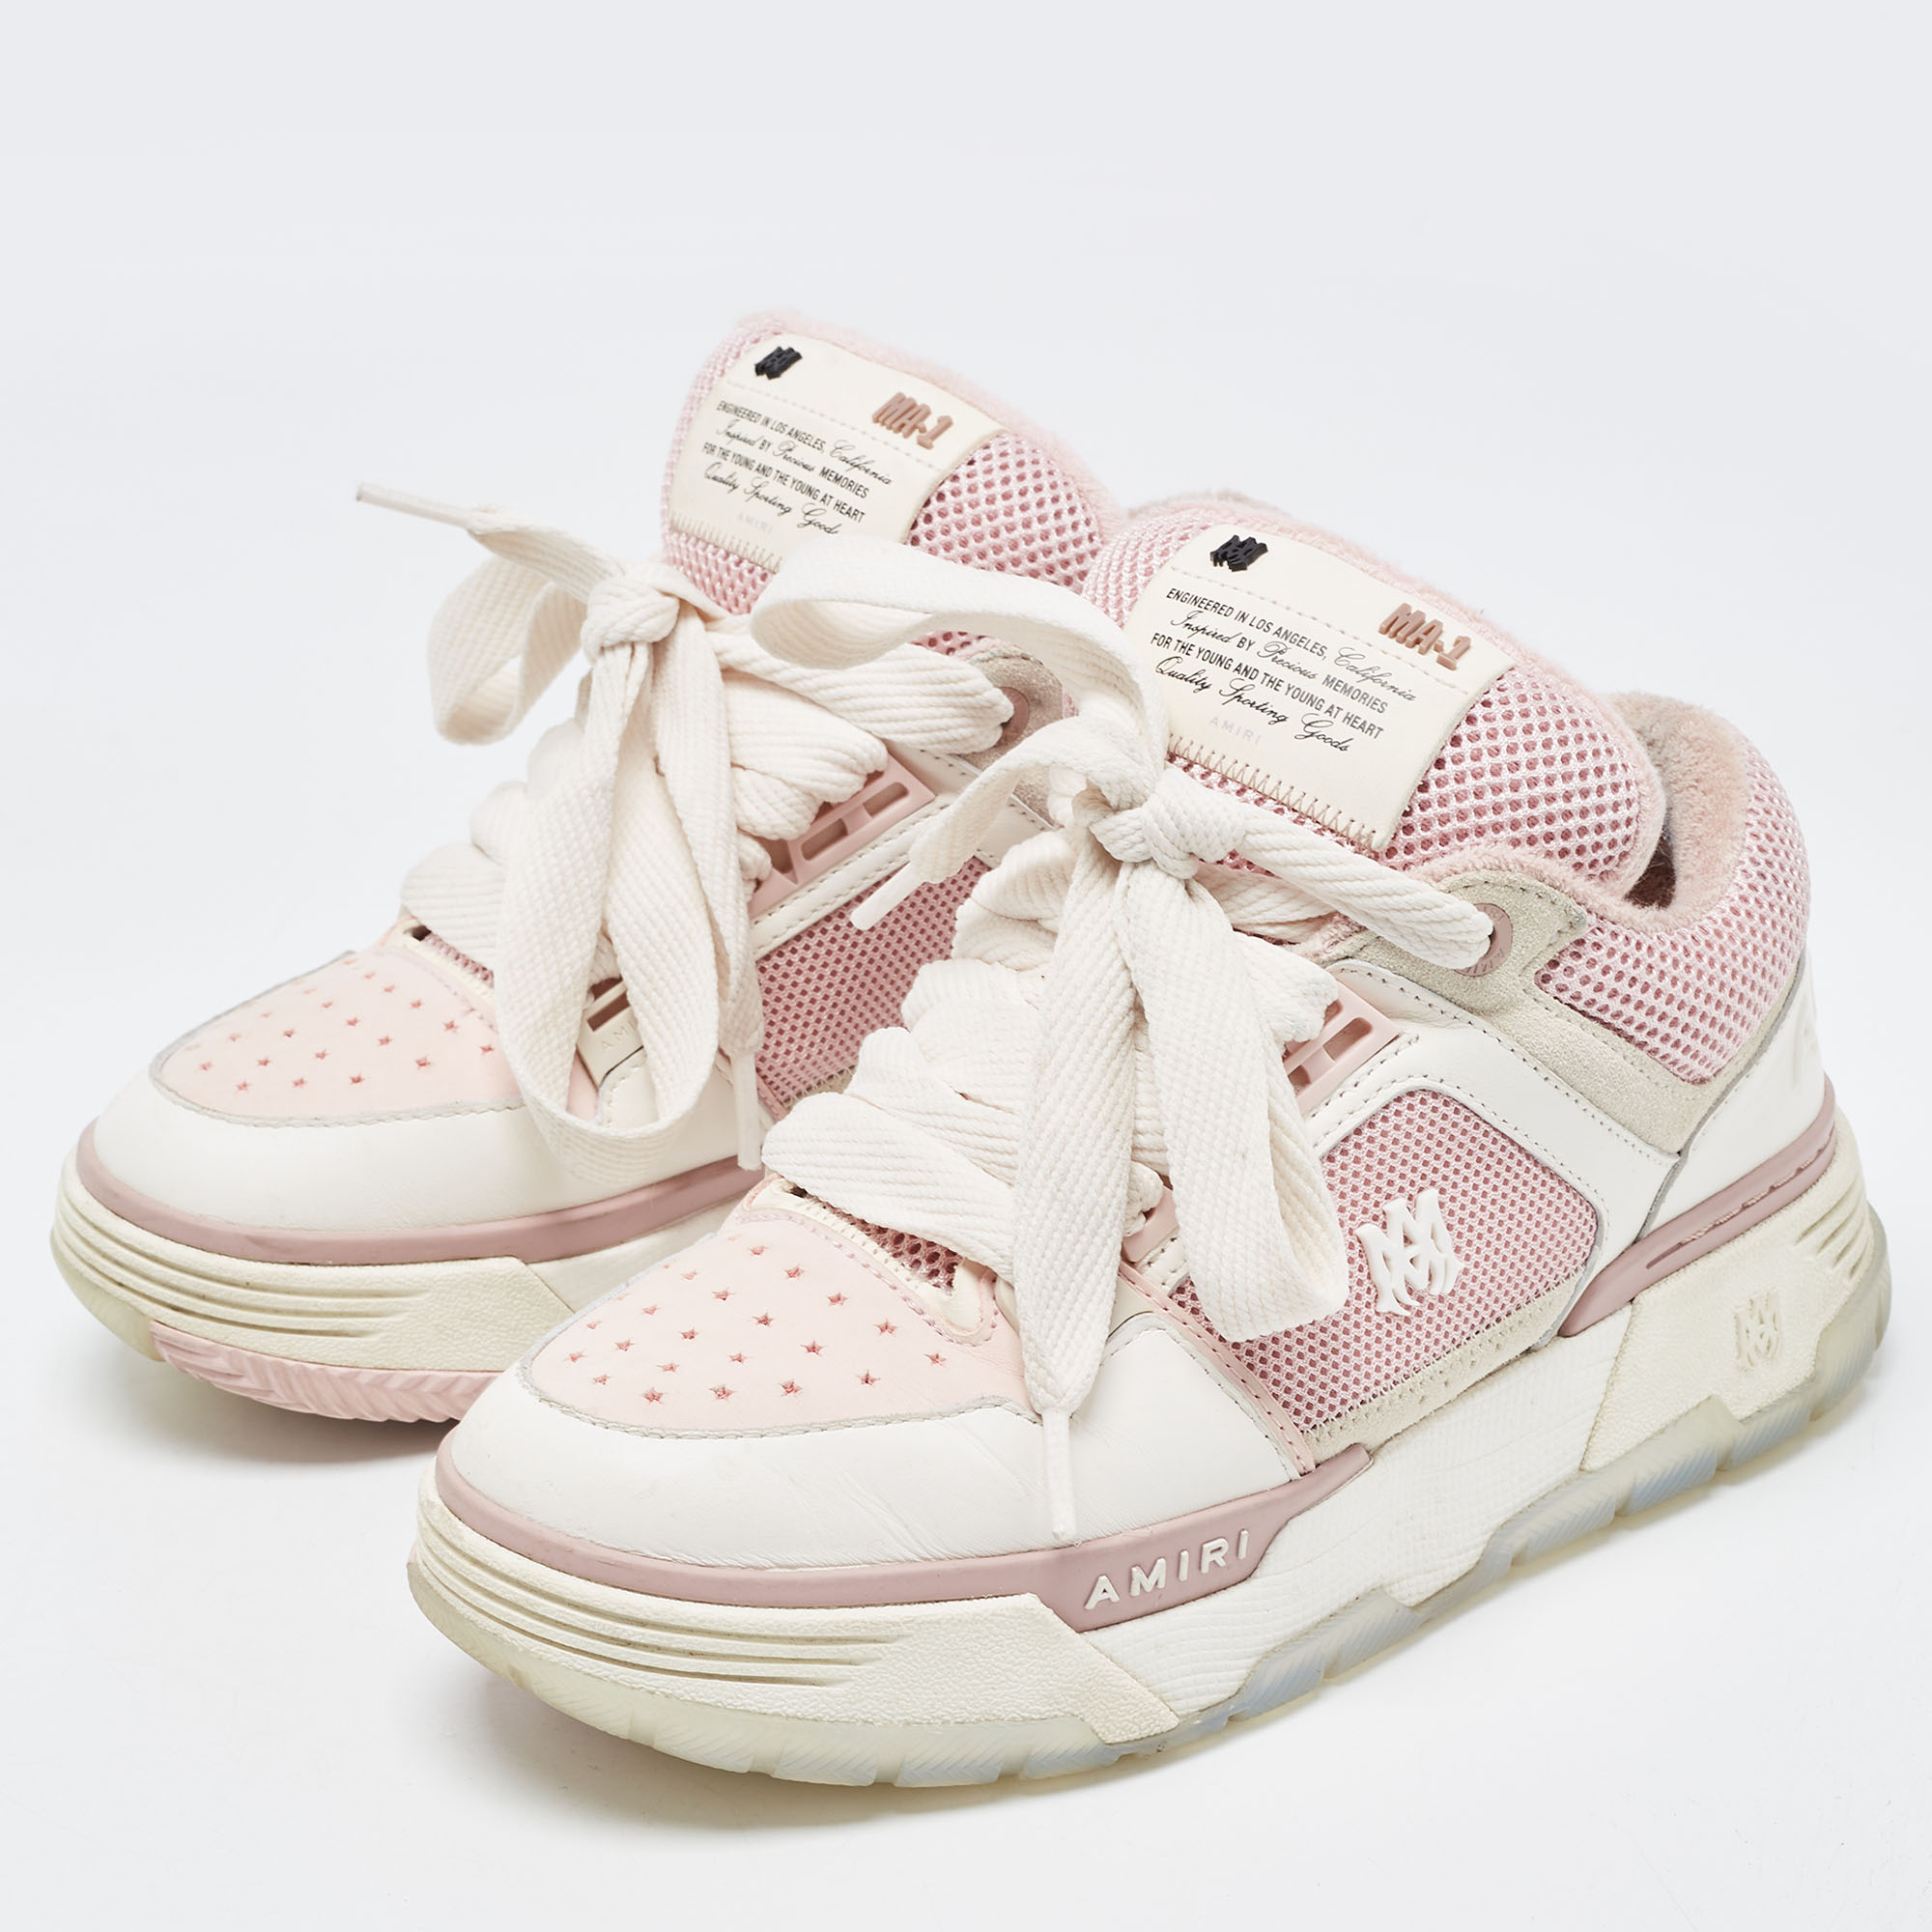 

Amiri Pink/White Mesh and Leather MA-1 Sneakers Size